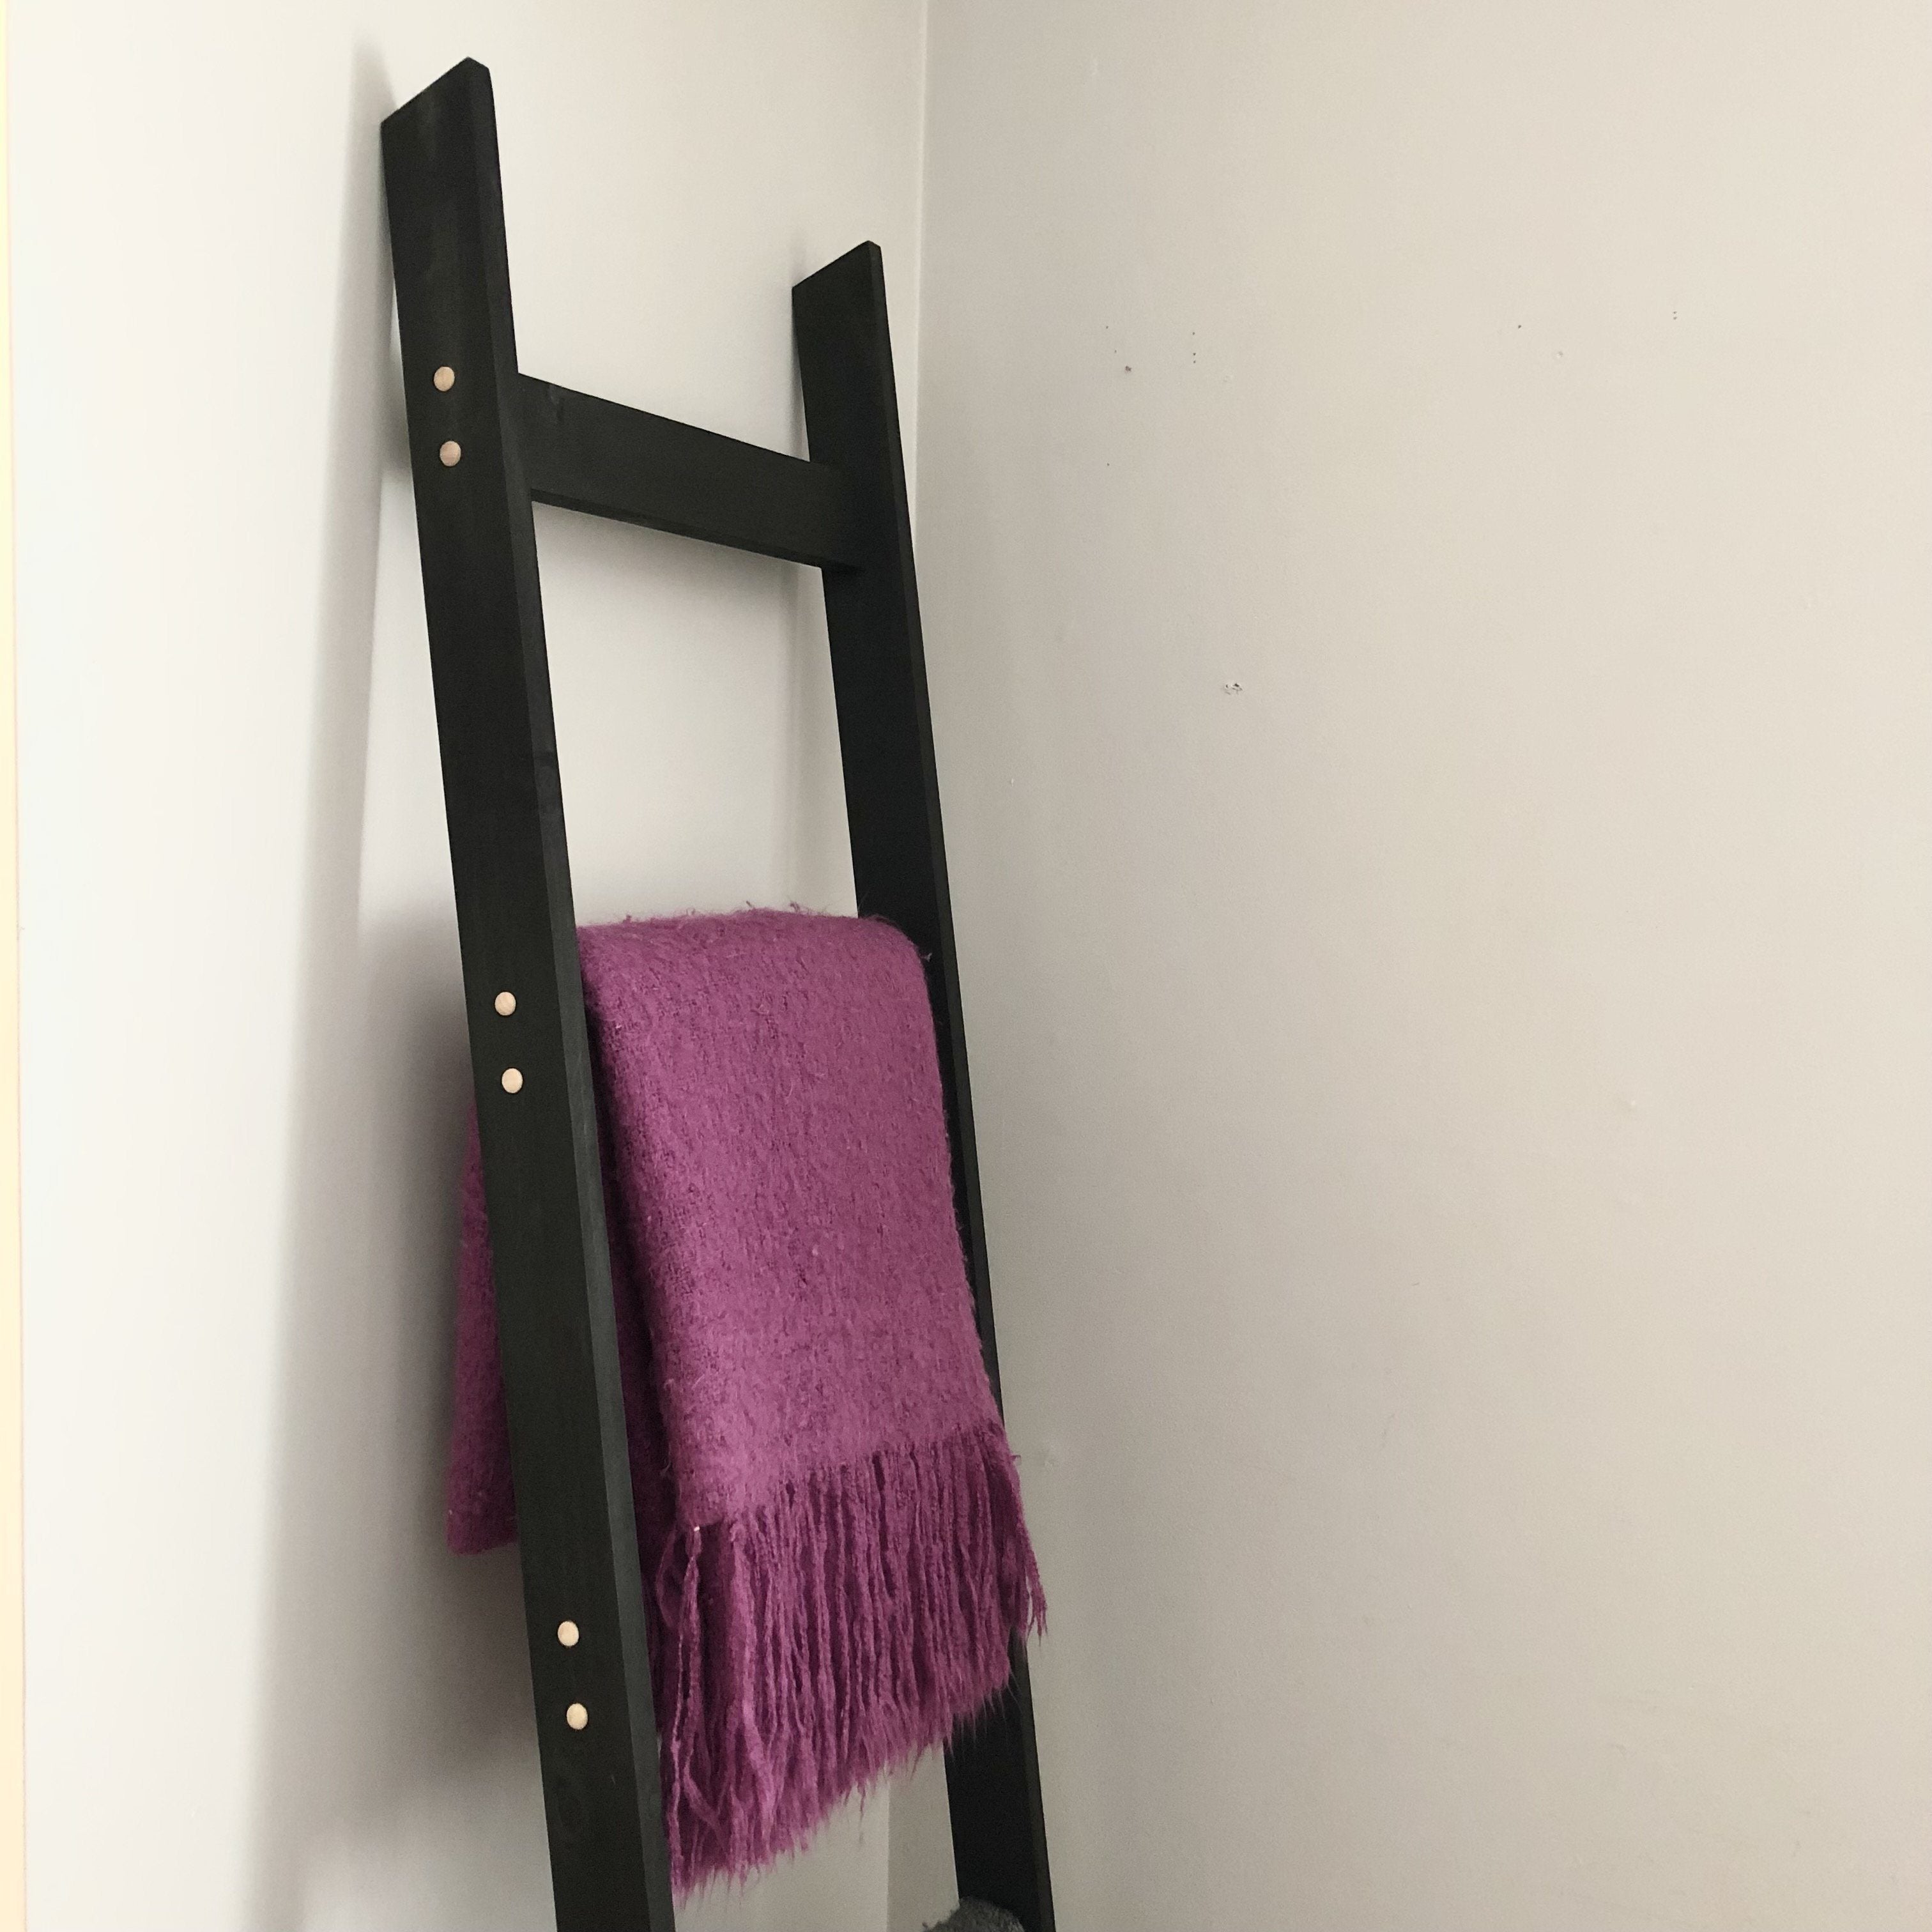 6ft Blanket Ladder in BLACK Stain Project Pine Designs Natural (Shown) 